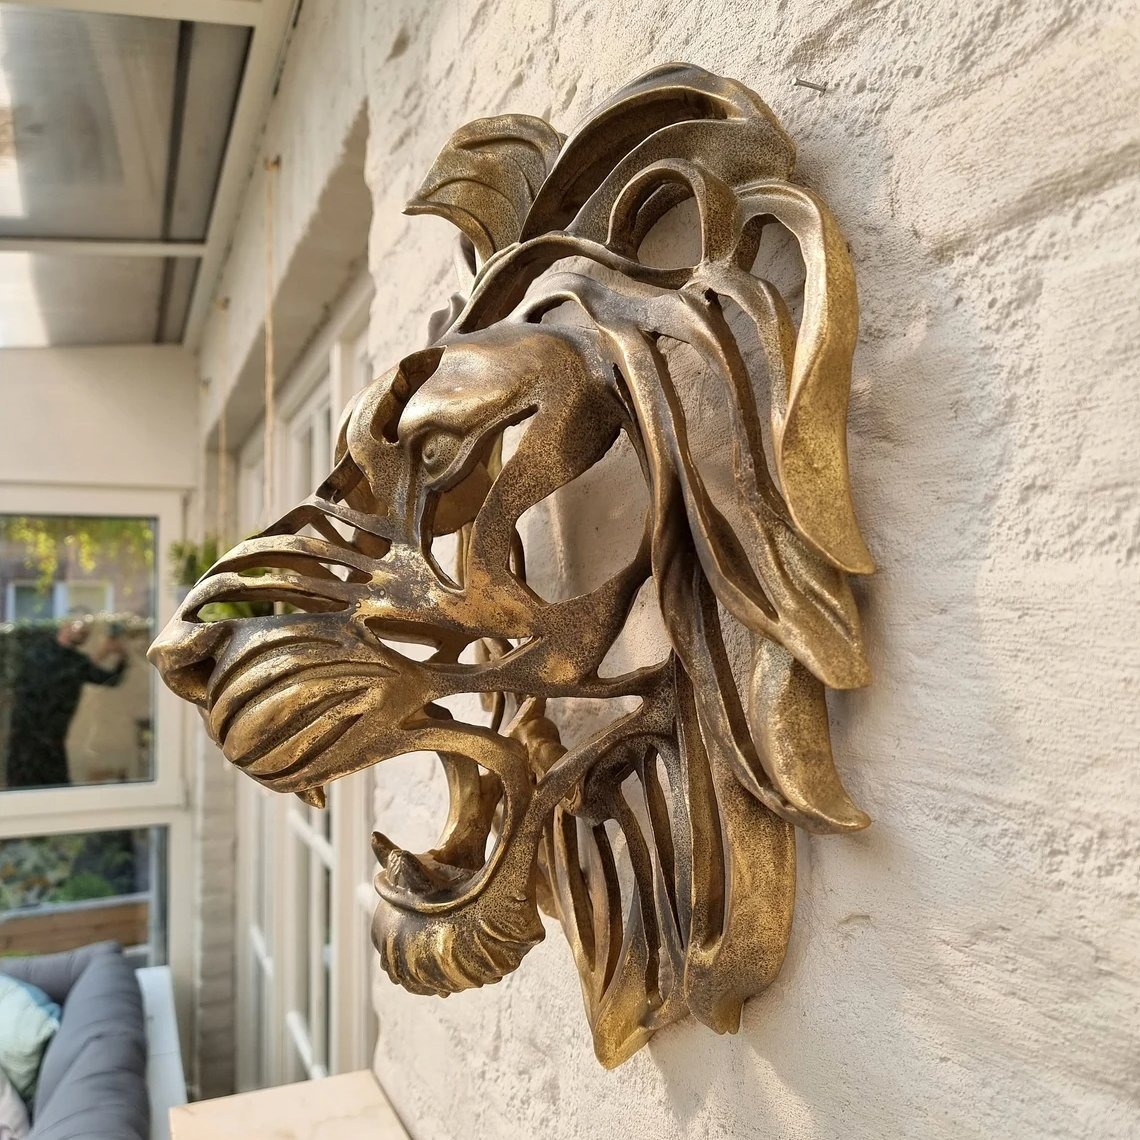 🎁Rare Find-Large Lion Head Wall Mounted Art Sculpture🎁